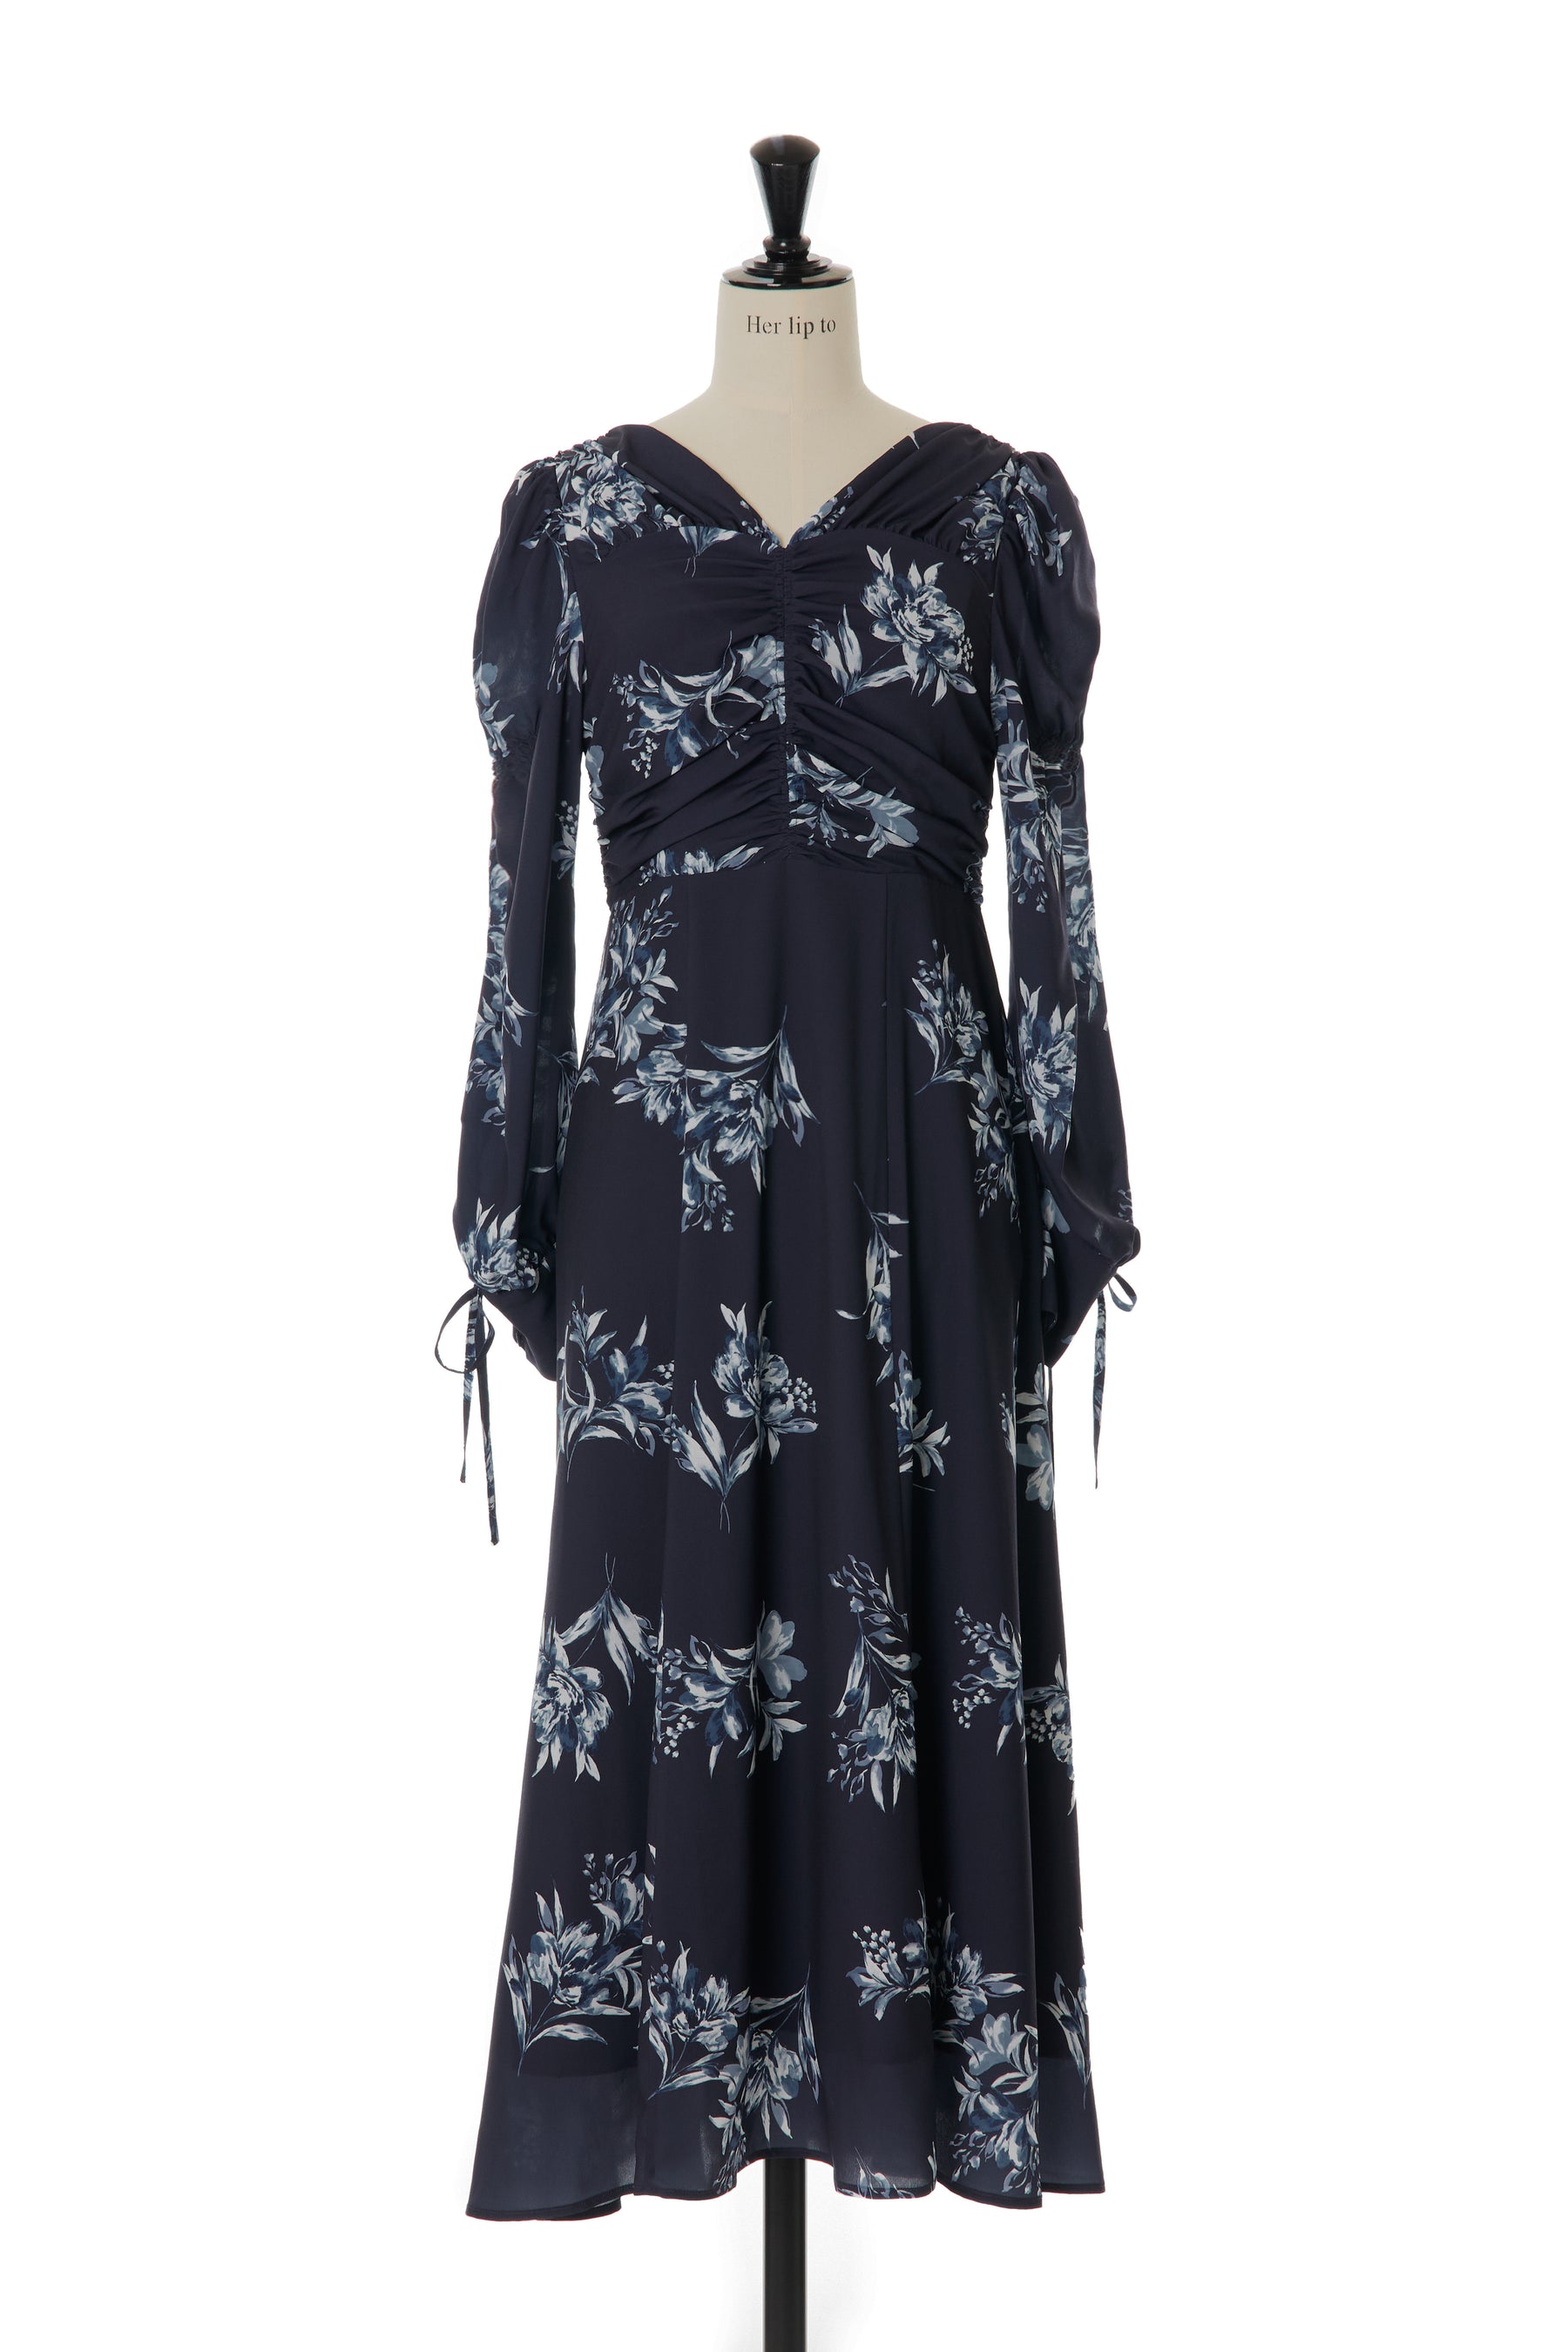 Her lip to  Lace Floral Dress Mサイズ Navy